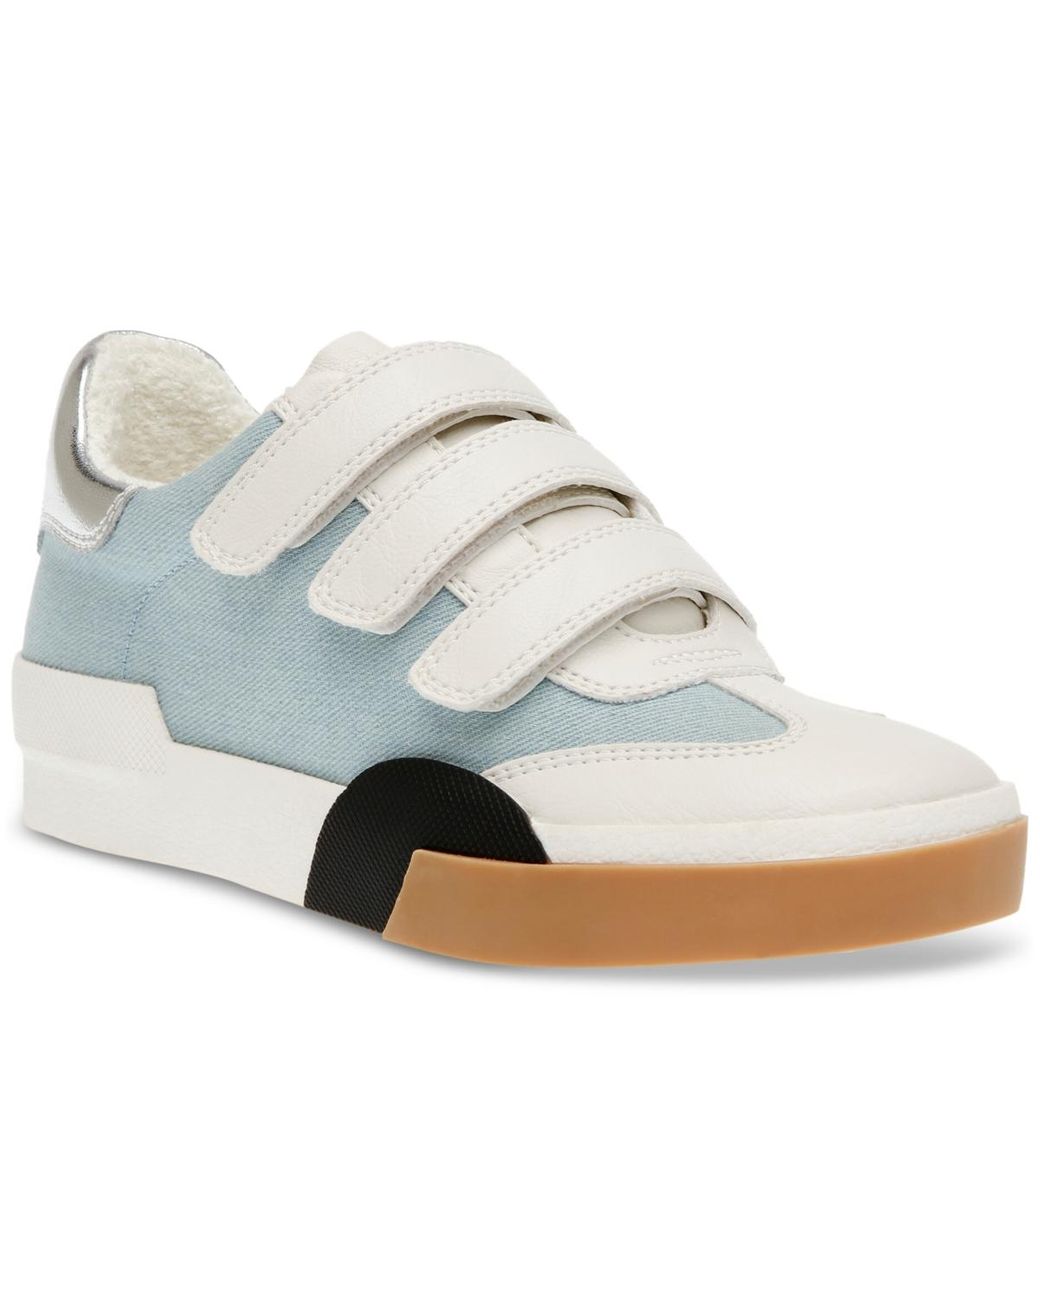 DV by Dolce Vita Hook Strappy Hidden Wedge Sneakers in White | Lyst